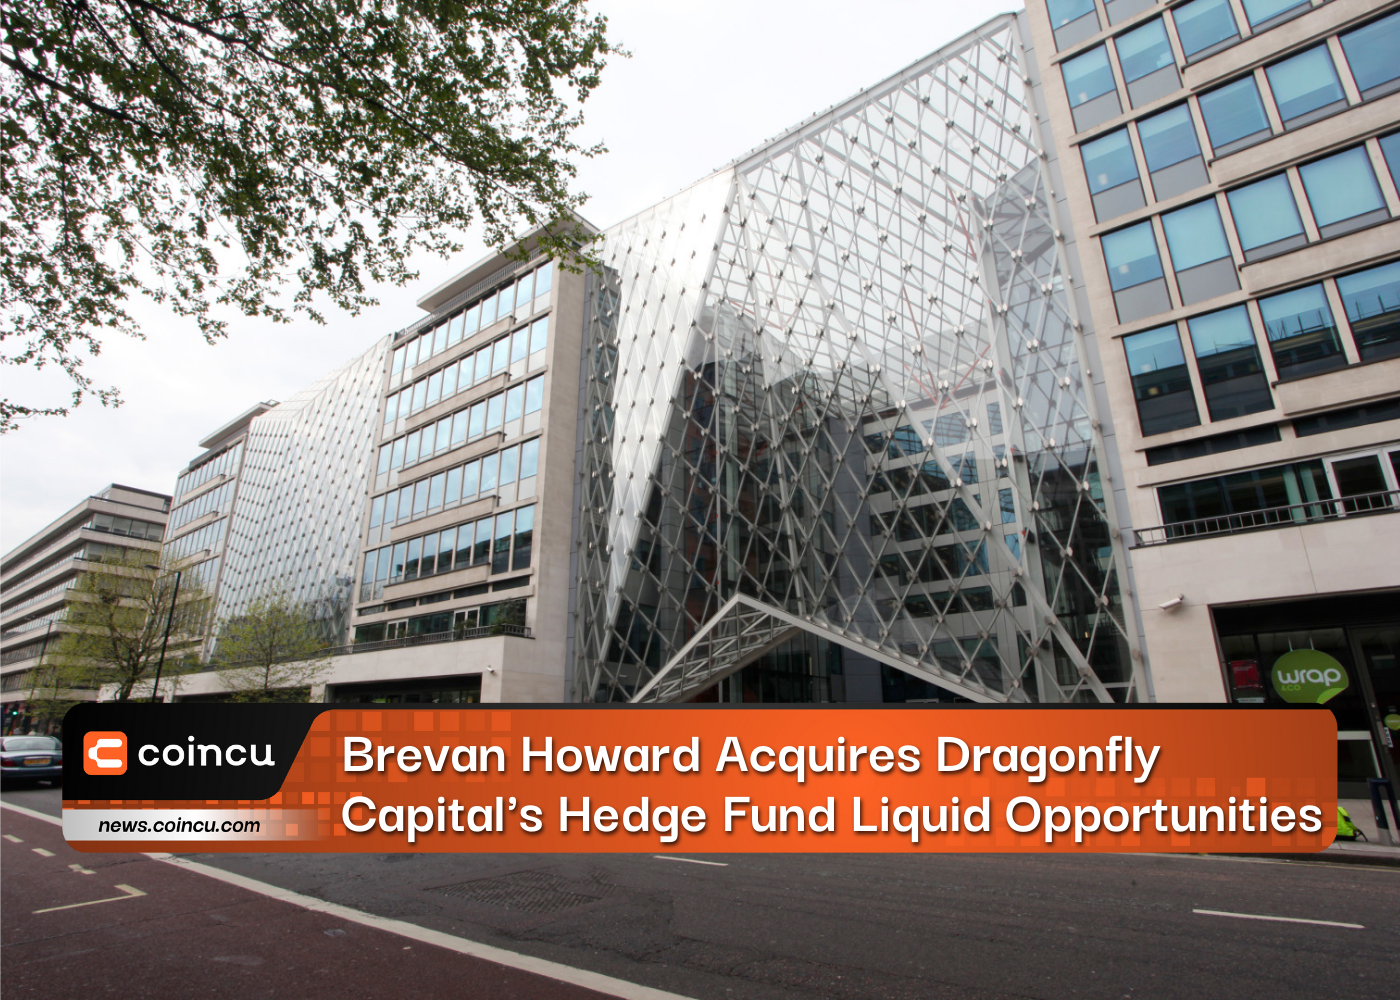 Brevan Howard Acquires Dragonfly Capital's Hedge Fund Liquid Opportunities